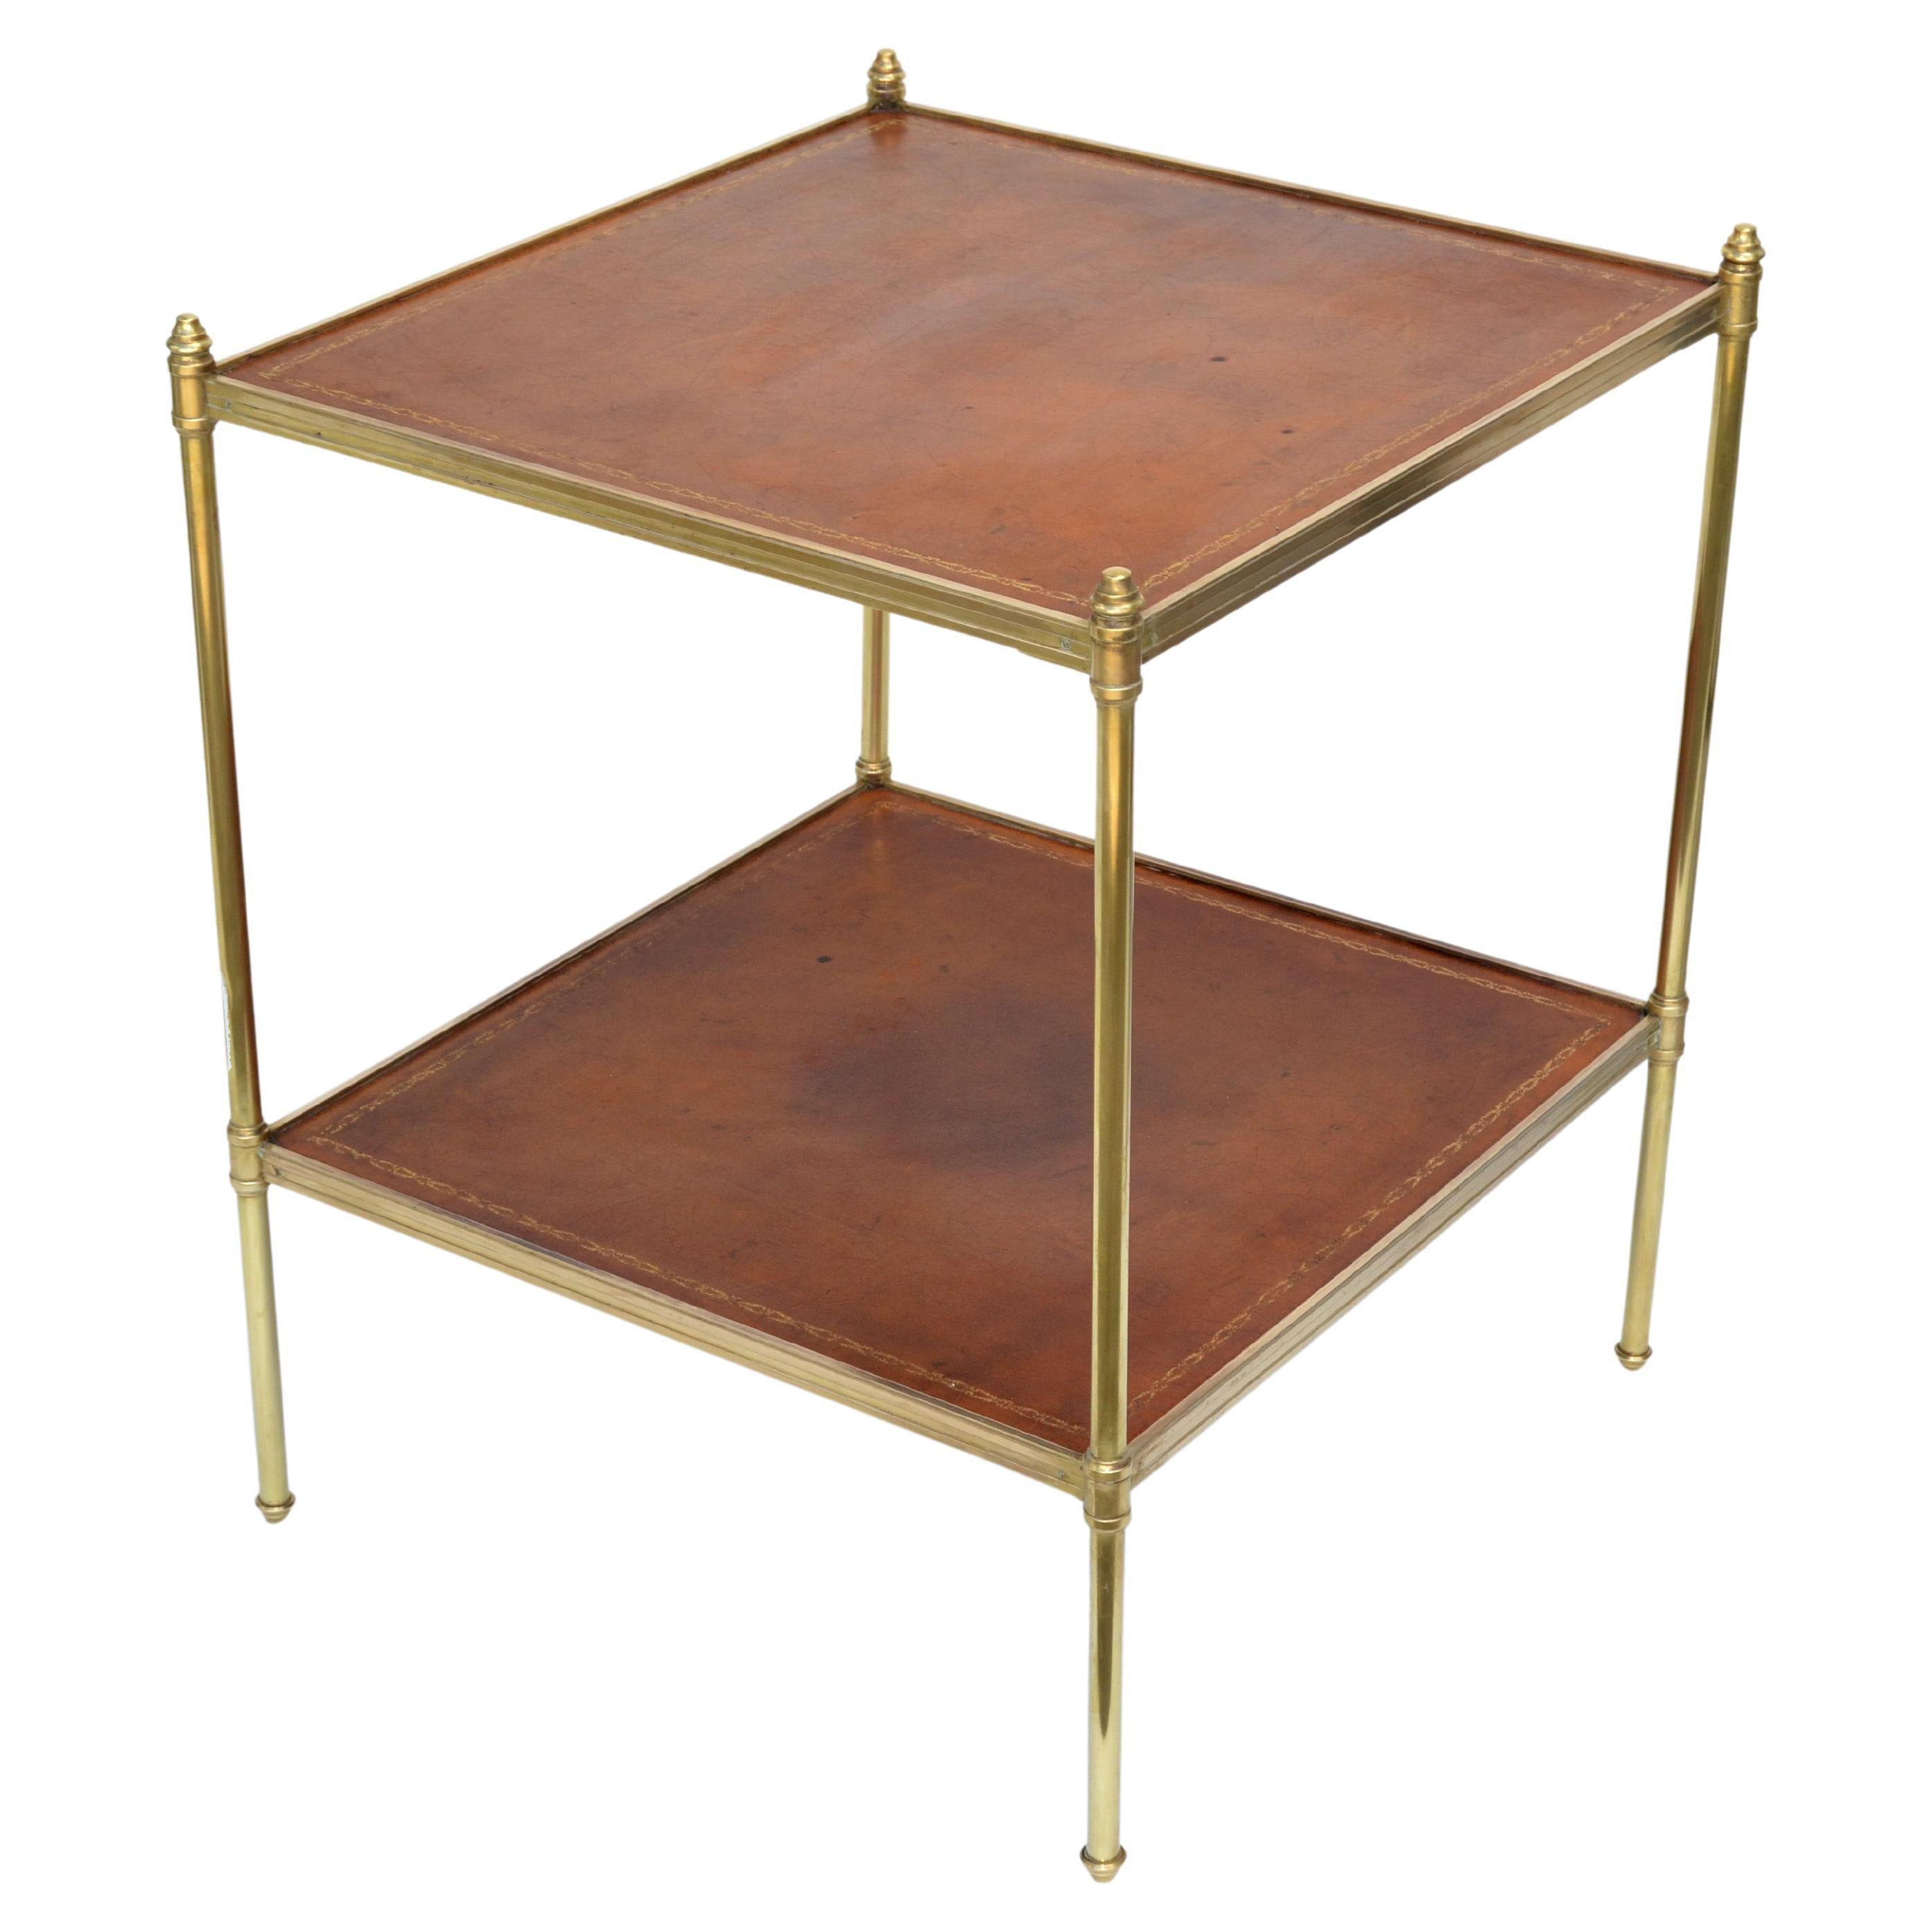 Maison Jansen Neoclassical 2 Tier Square Leather Top Side End Table France